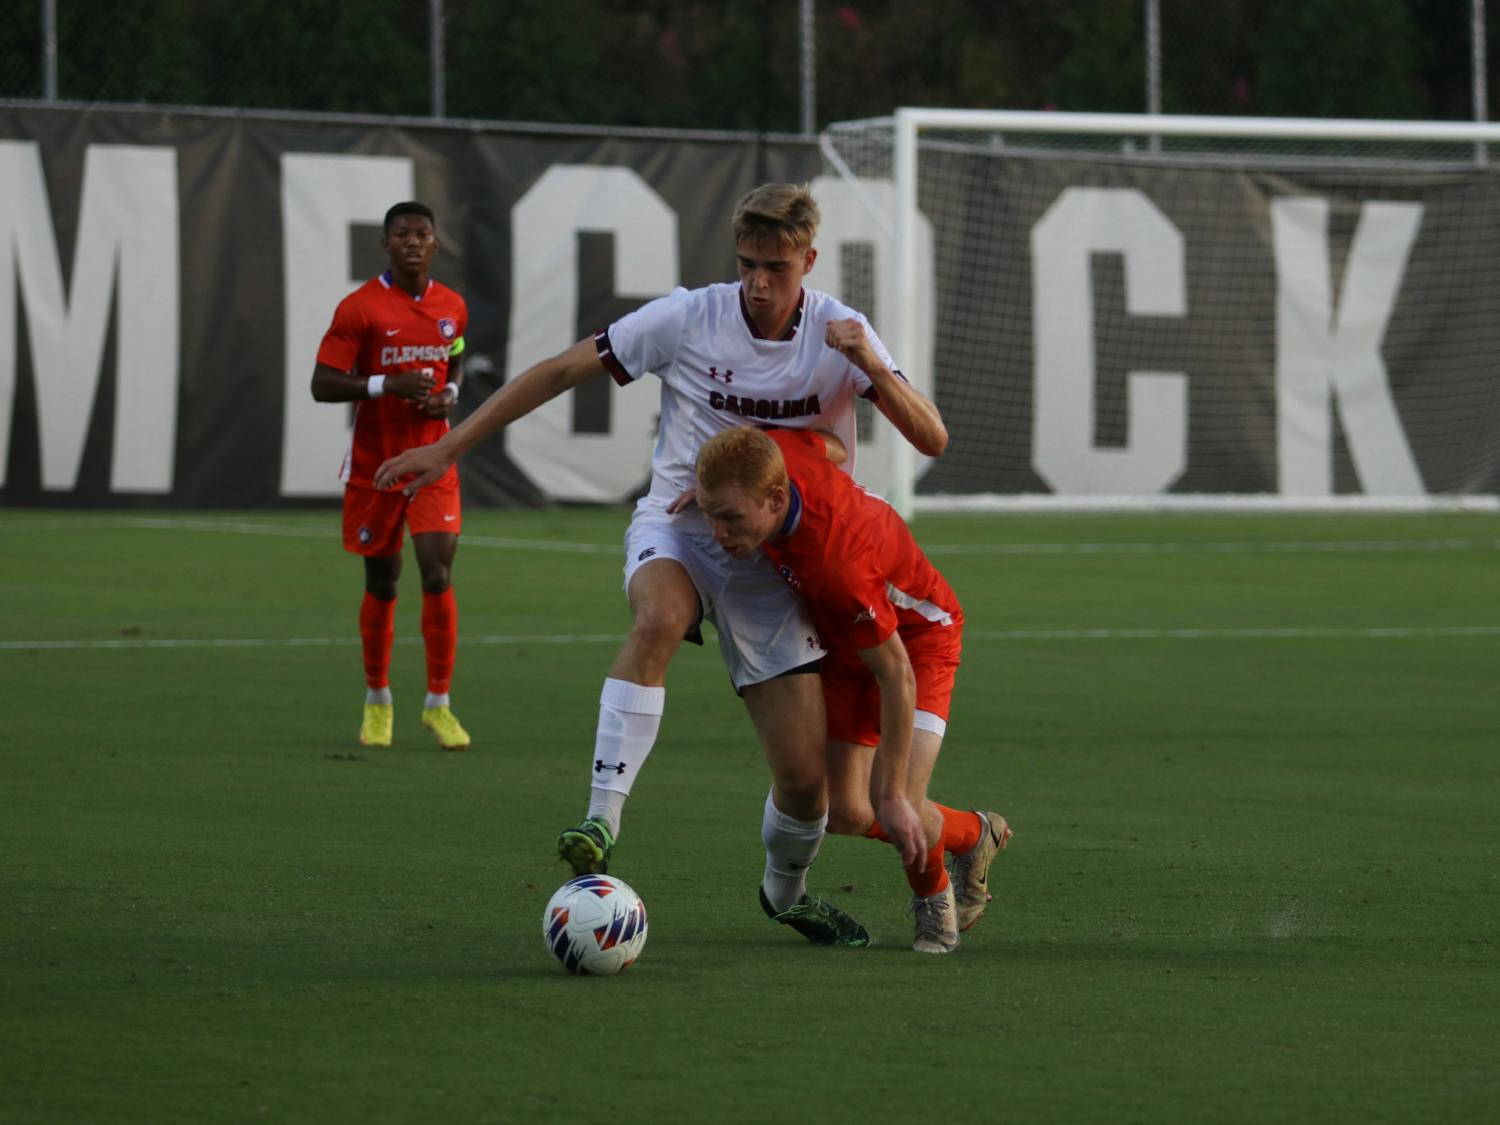 Senior Laurits Lillemose fighting to keep possession during the South Carolina's match against Clemson on Sep. 2, 2022